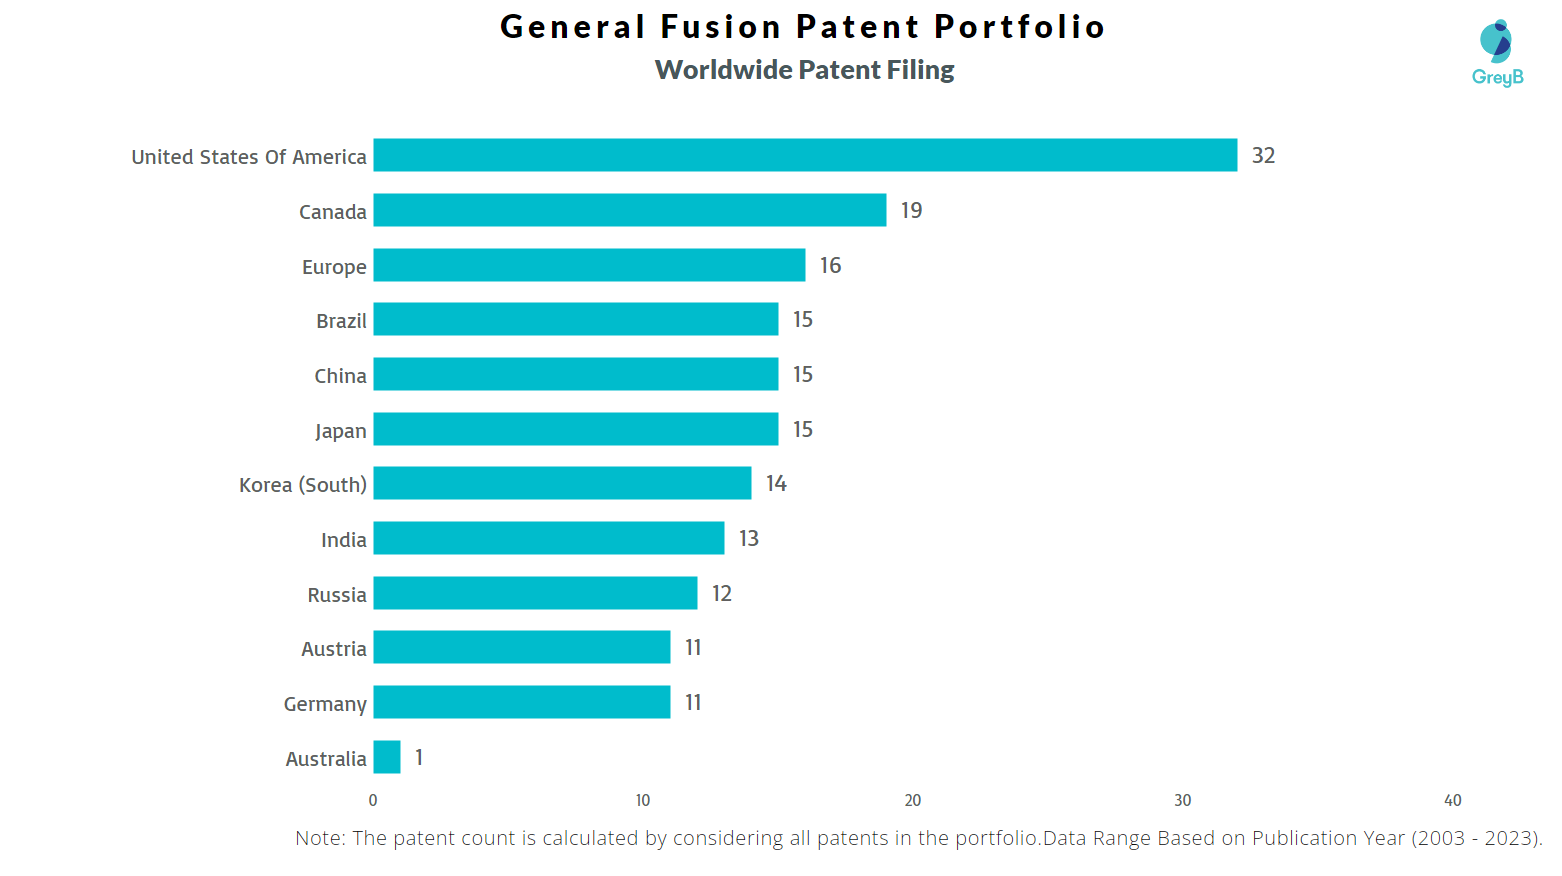 General Fusion Worldwide Patent Filing